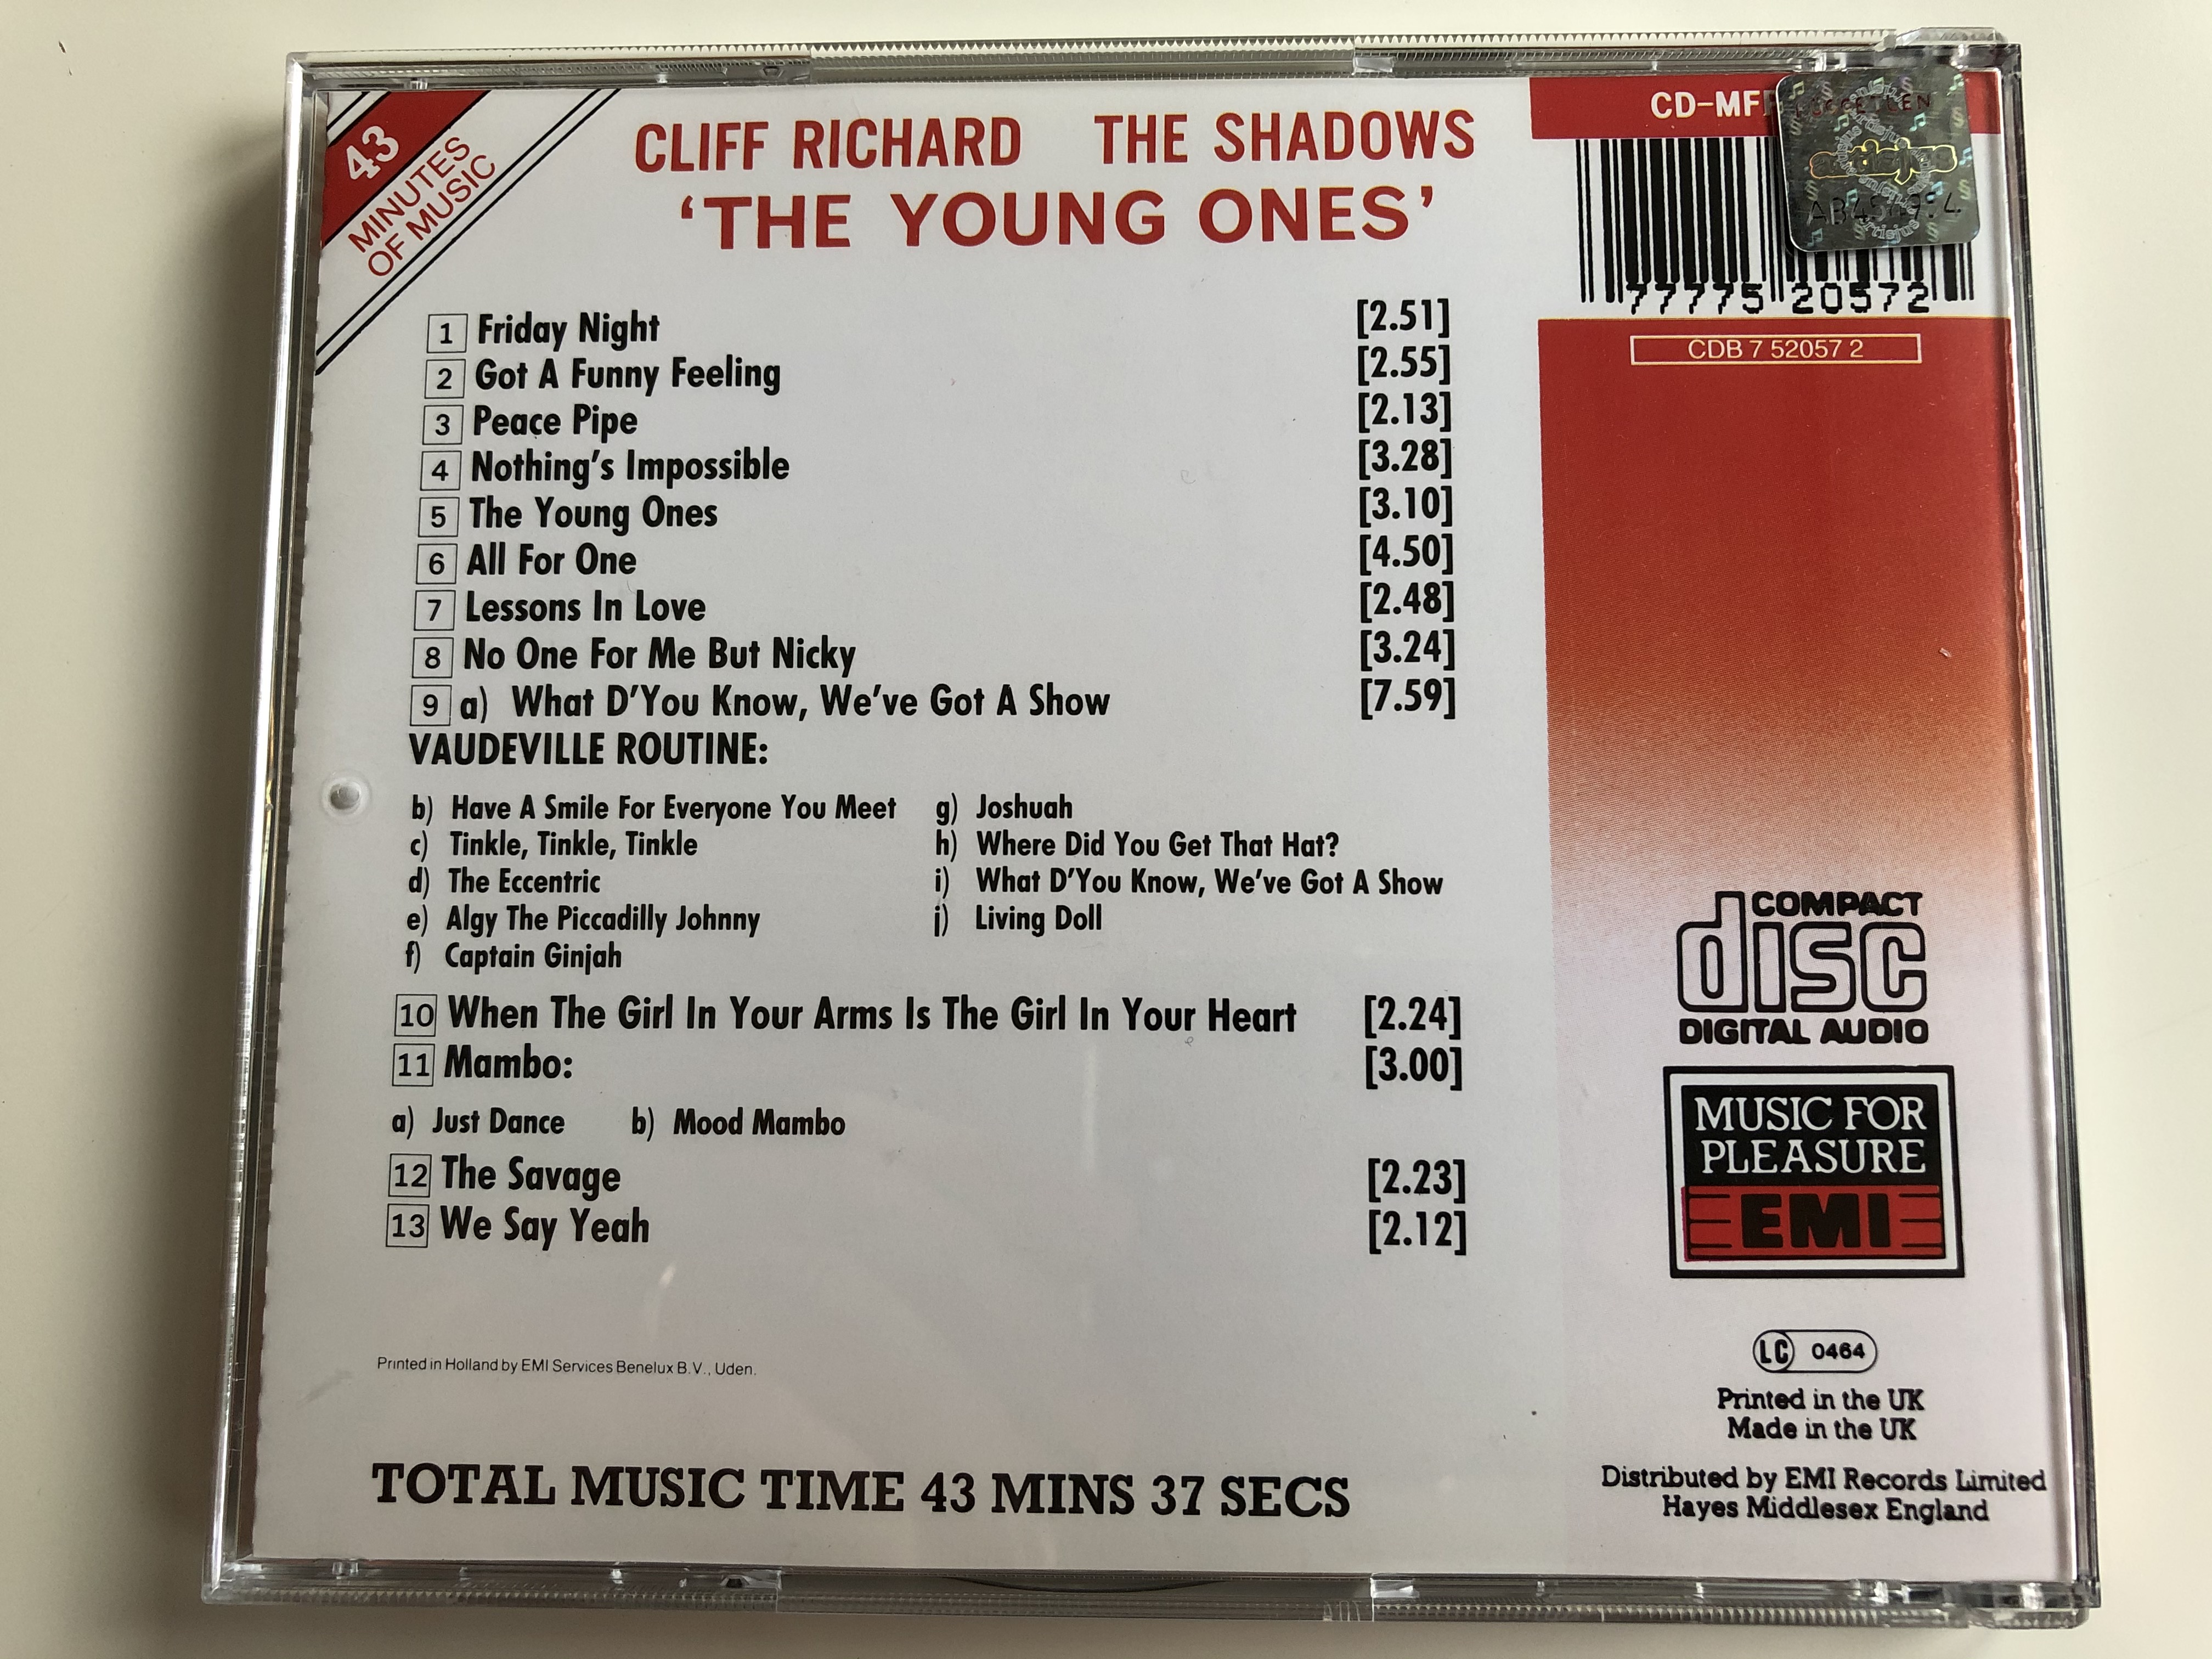 cliff-richard-the-young-ones-cliff-richard-the-shadows-music-for-pleasure-audio-cd-stereo-cd-mfp-6020-5-.jpg